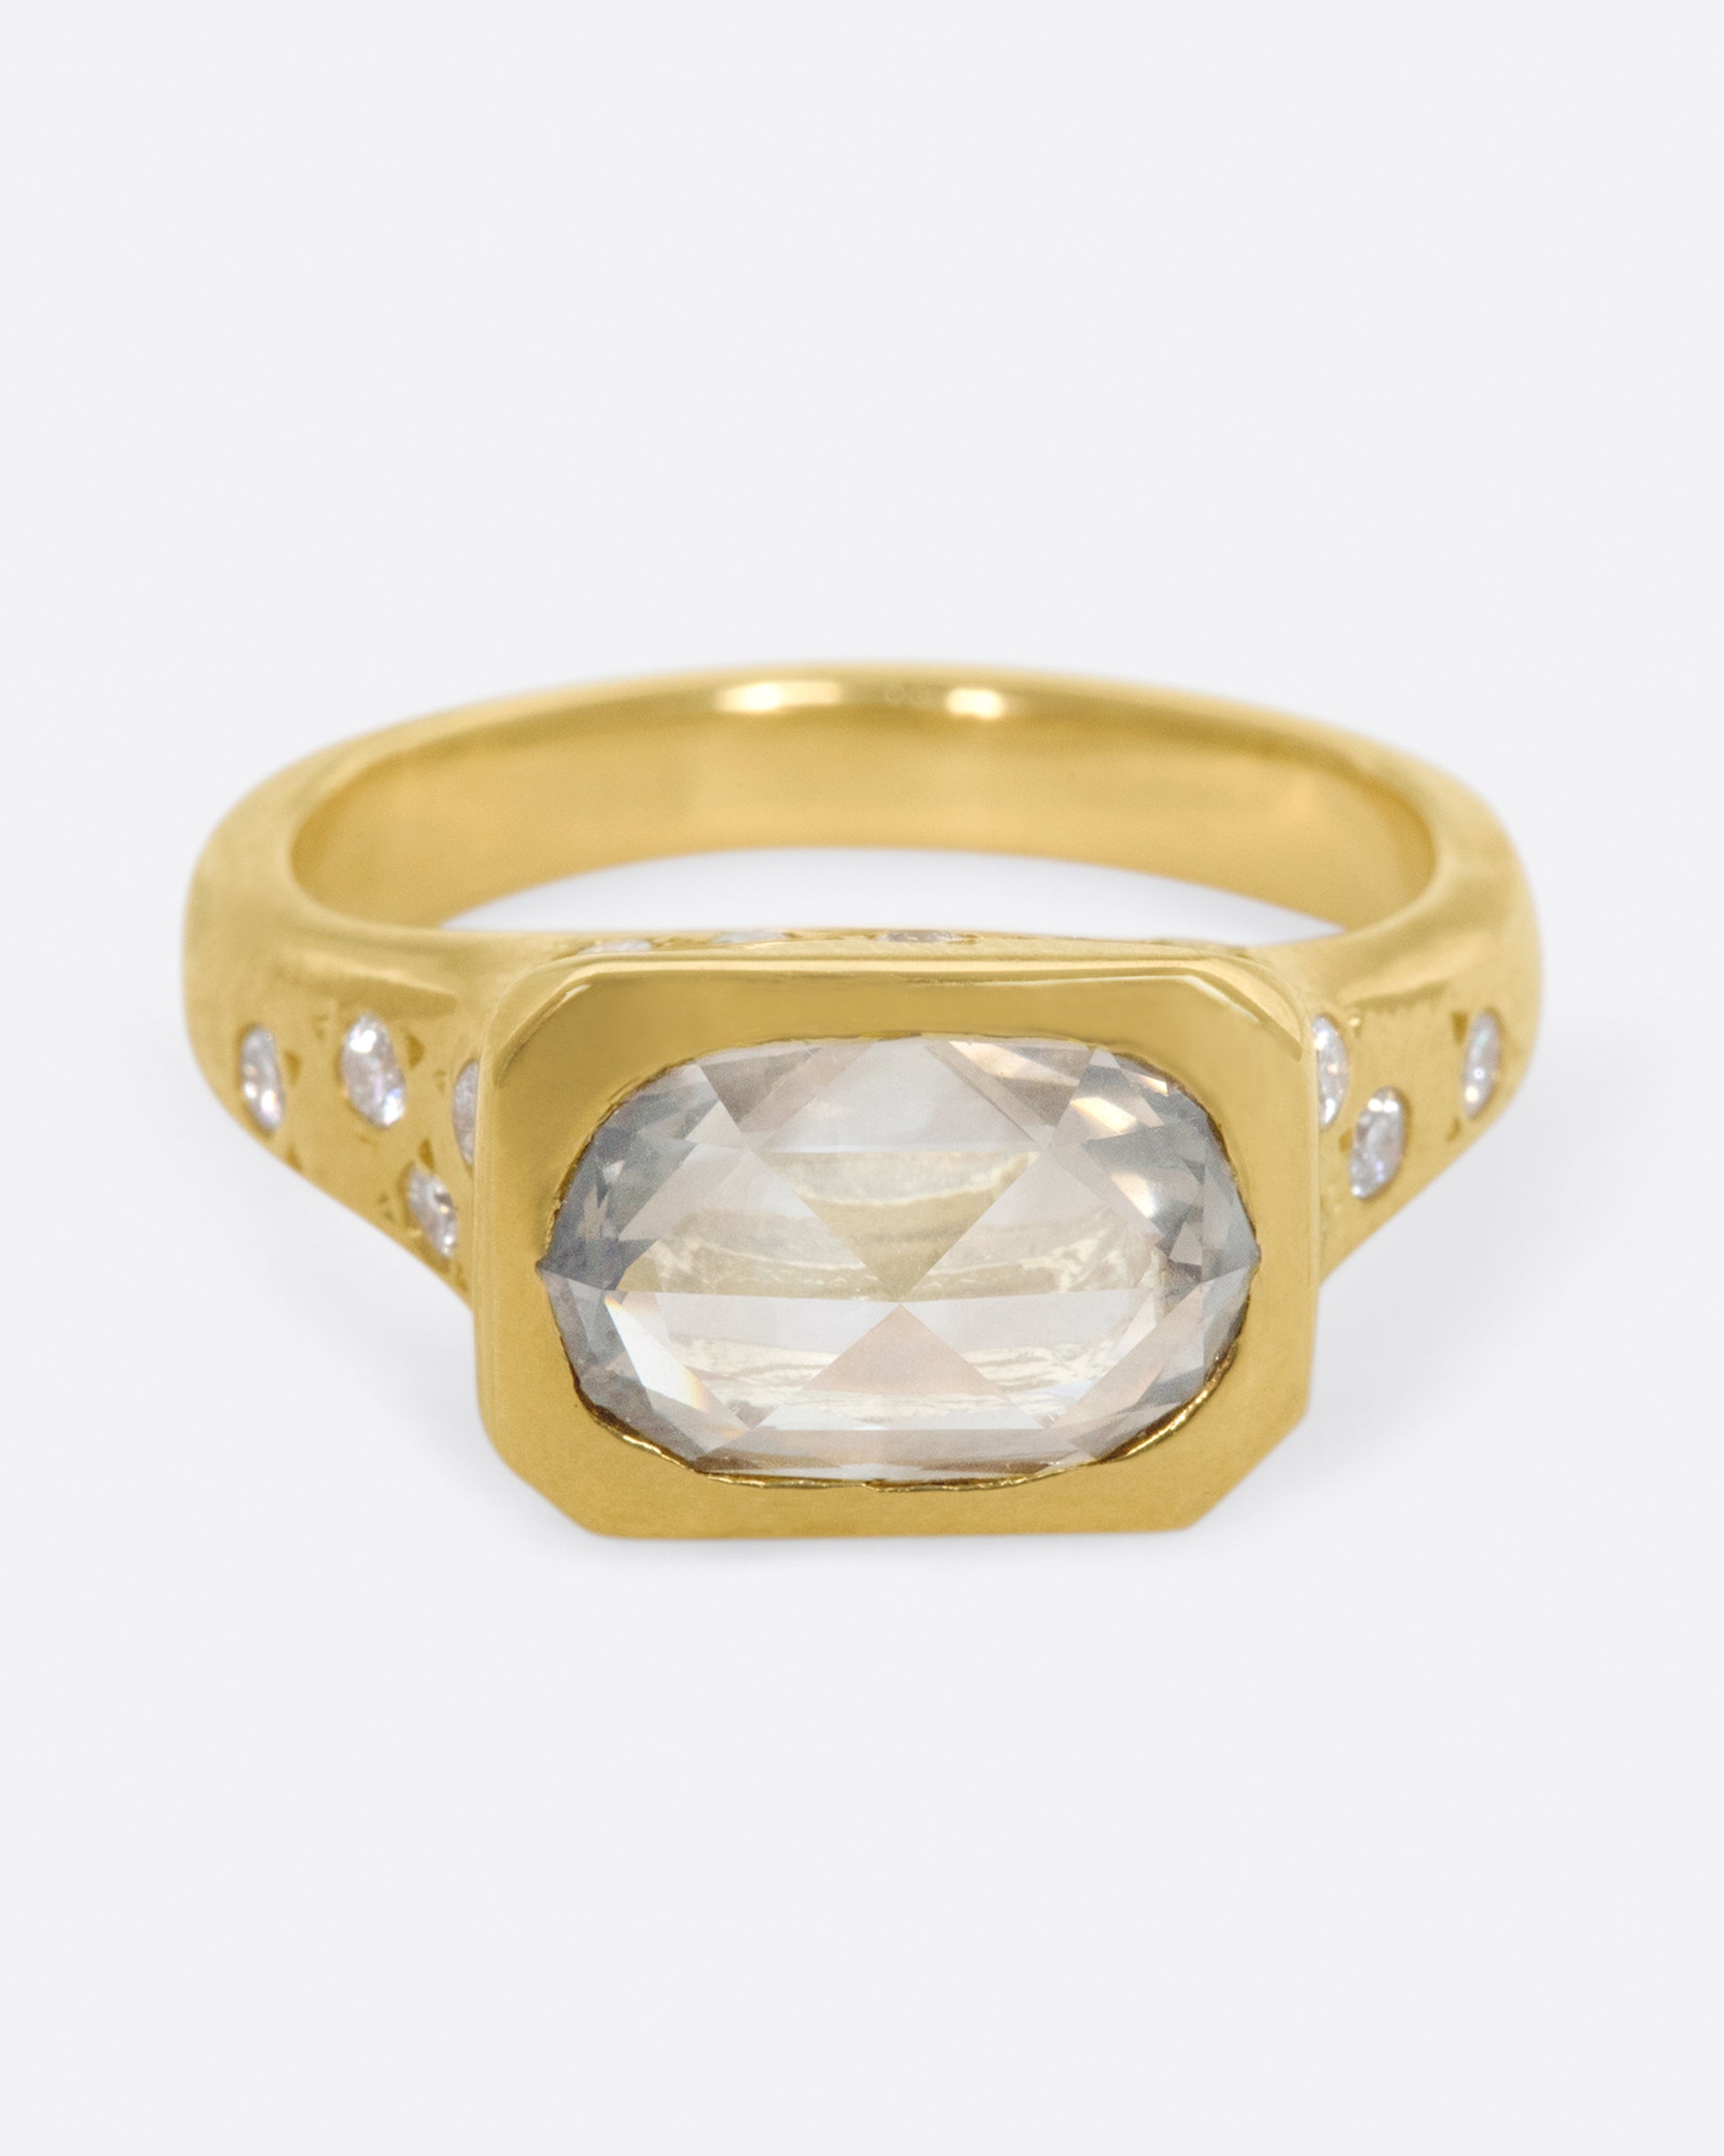 This ring creates a balance between being classic, impactful and a bit playful.